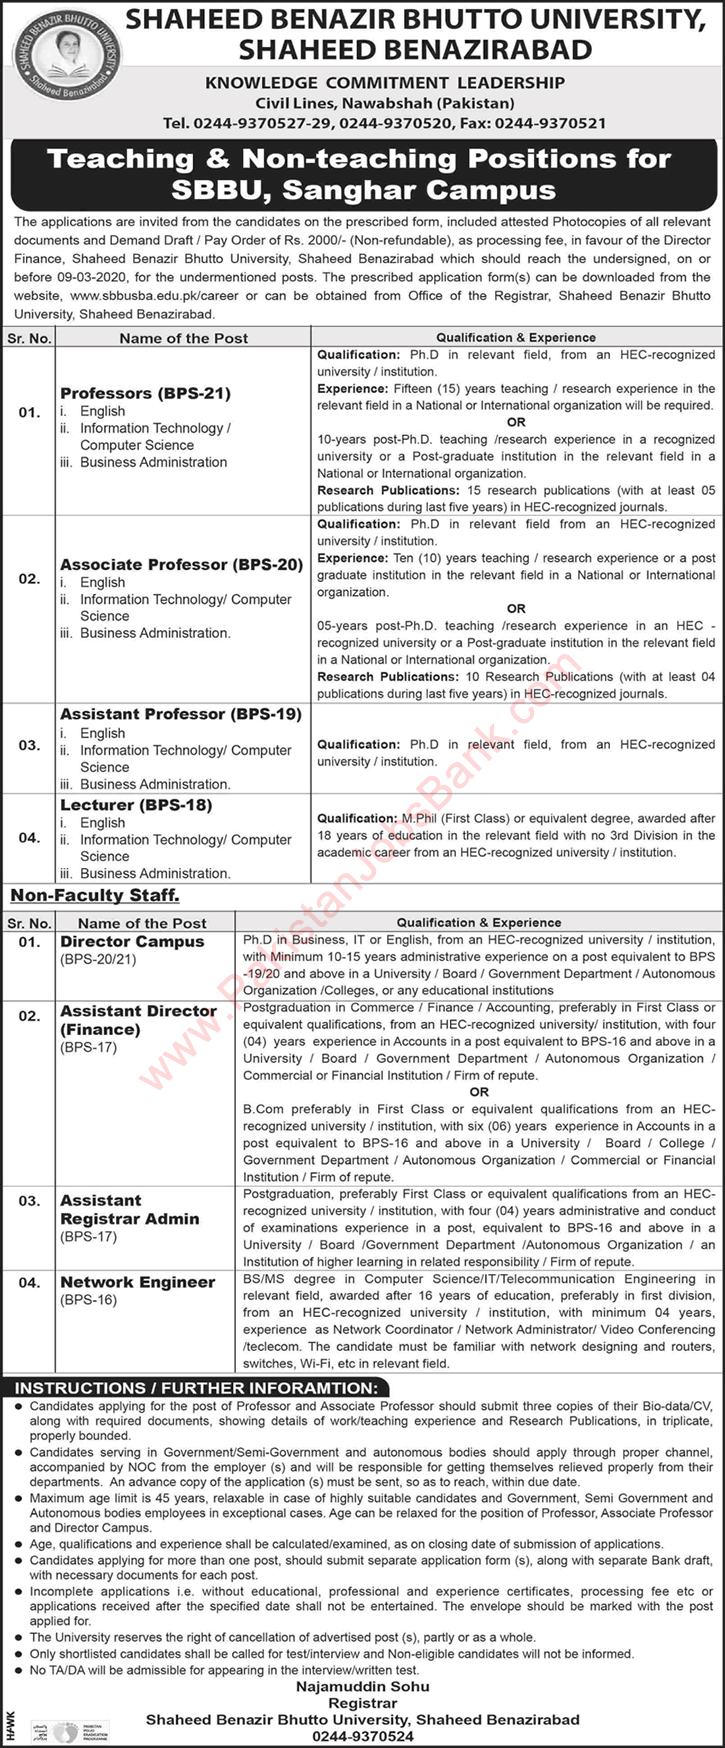 Shaheed Benazir Bhutto University Sanghar Campus Jobs 2020 February Teaching Faculty & Others Latest